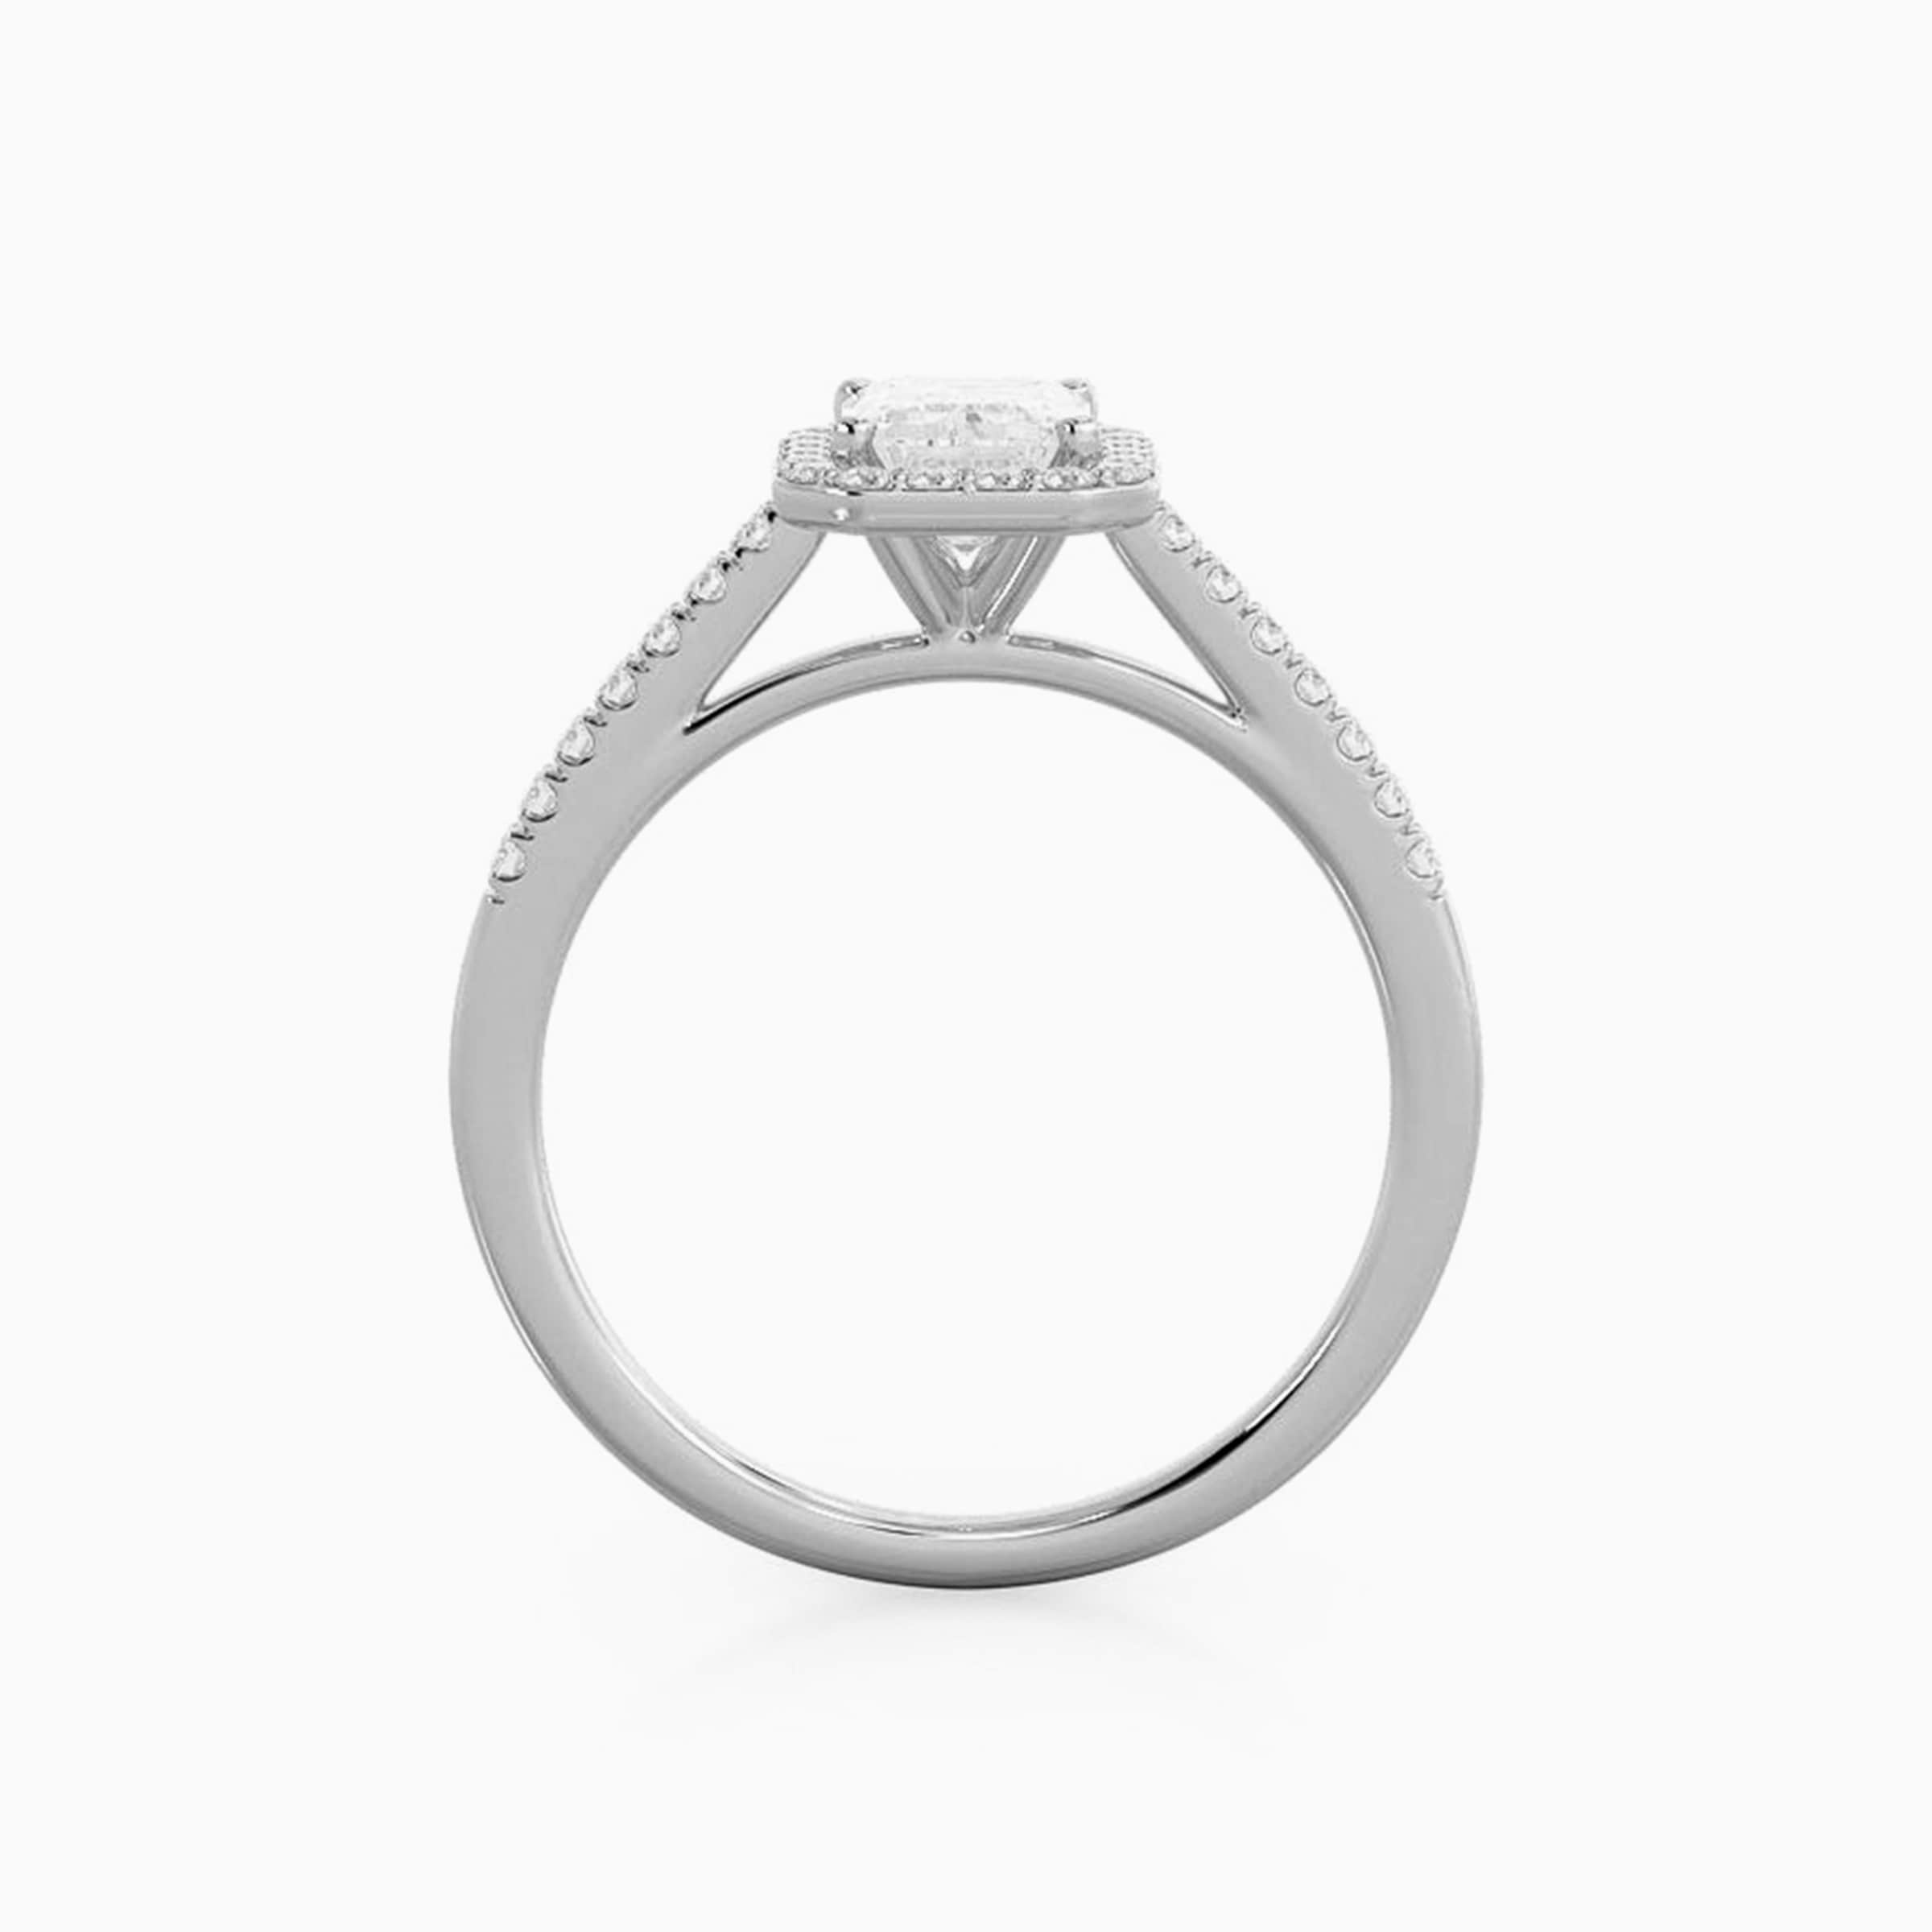 Darry Ring 3 carat emerald cut halo engagement ring